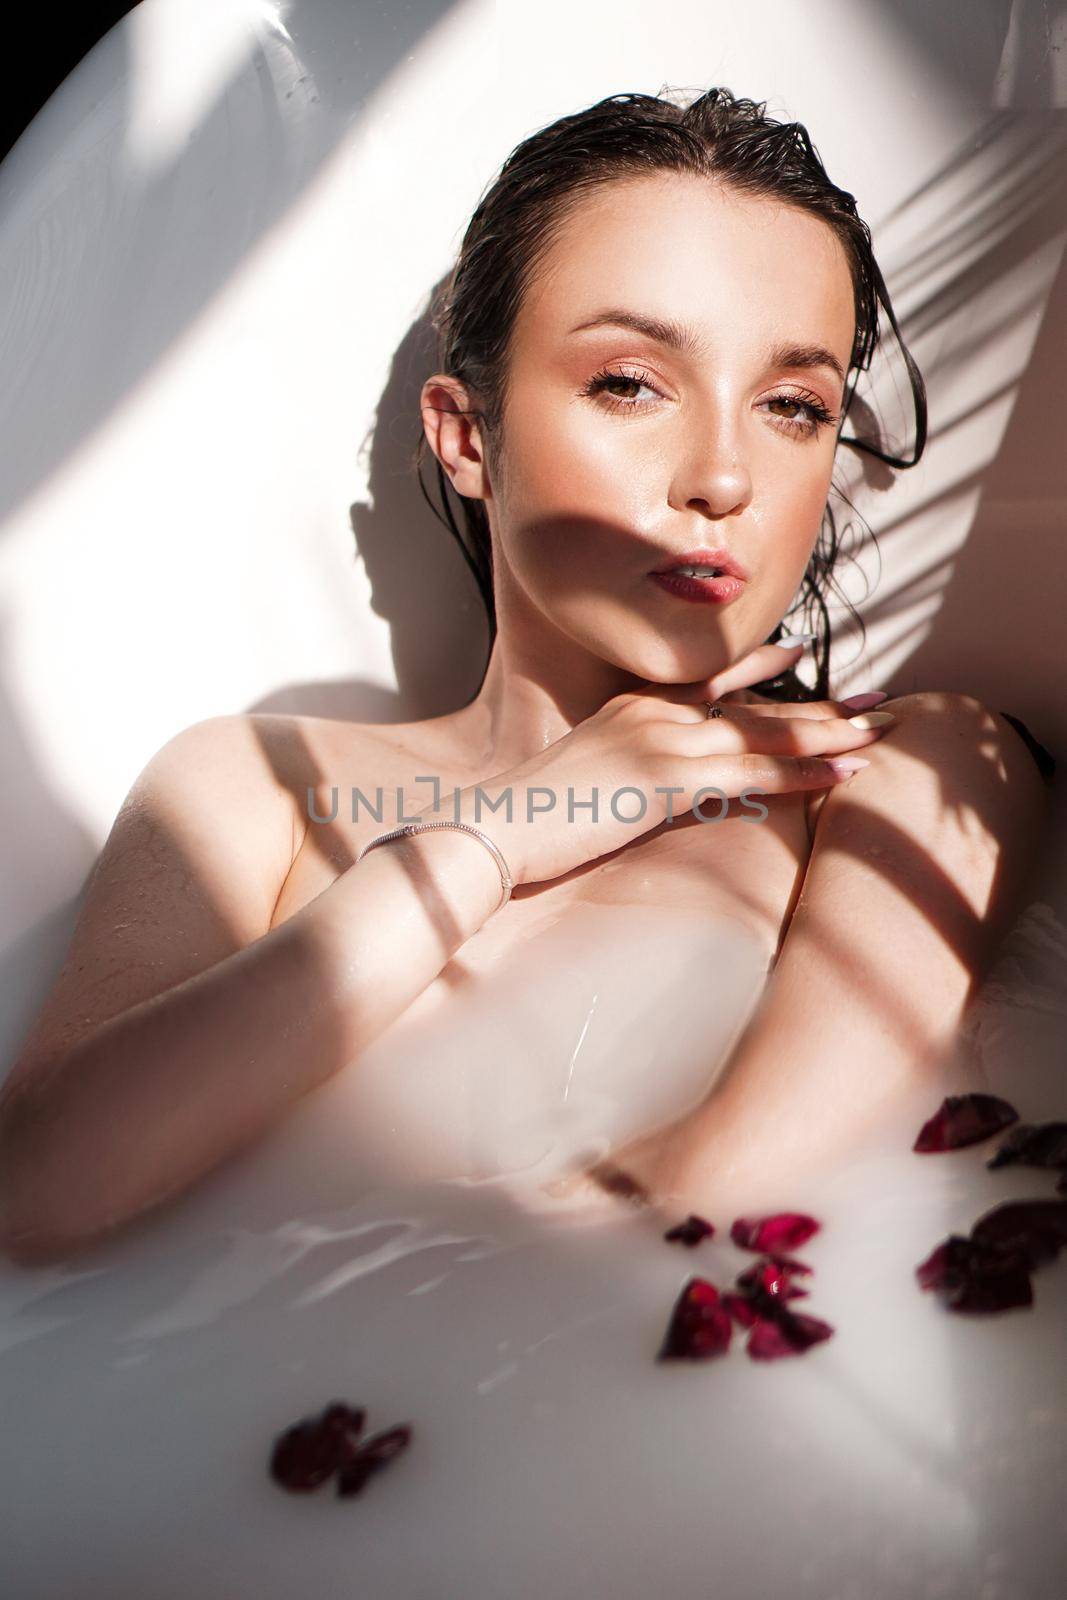 An Attractive girl relaxing in bath on light background by natali_brill